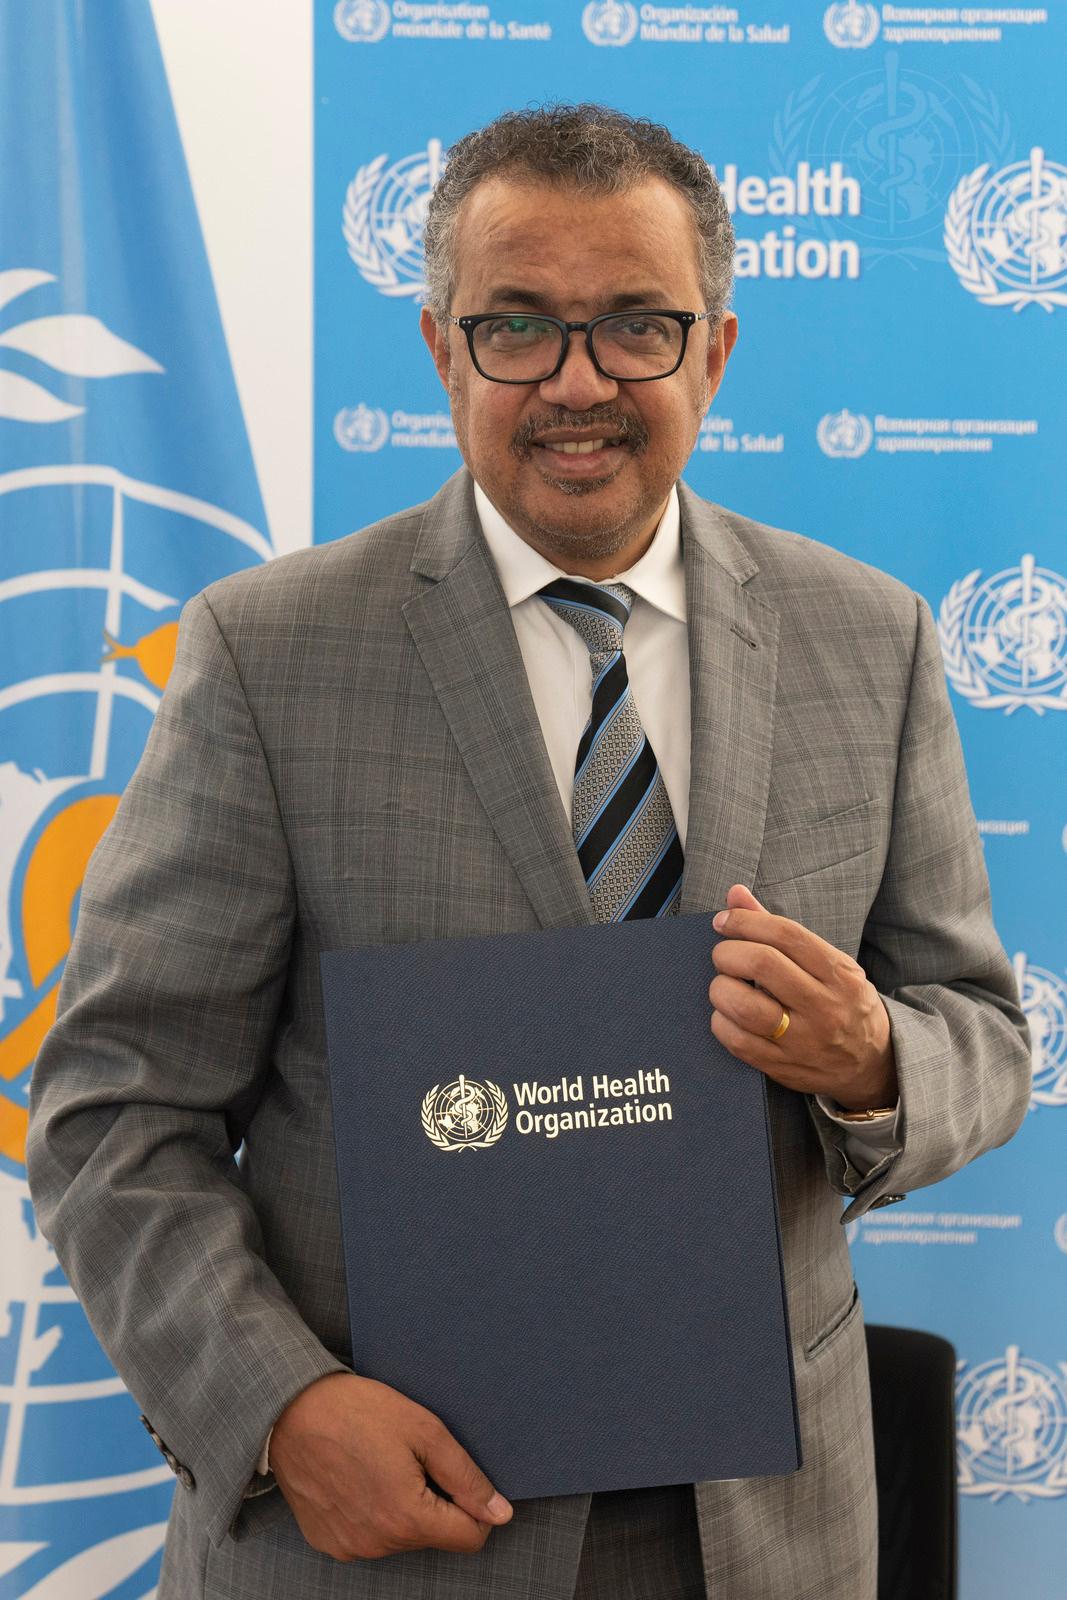 Digital innovation is a powerful tool for reaching young people and getting them moving, Dr Tedros Adhanom Ghebreyesus, director general, World Health Organization